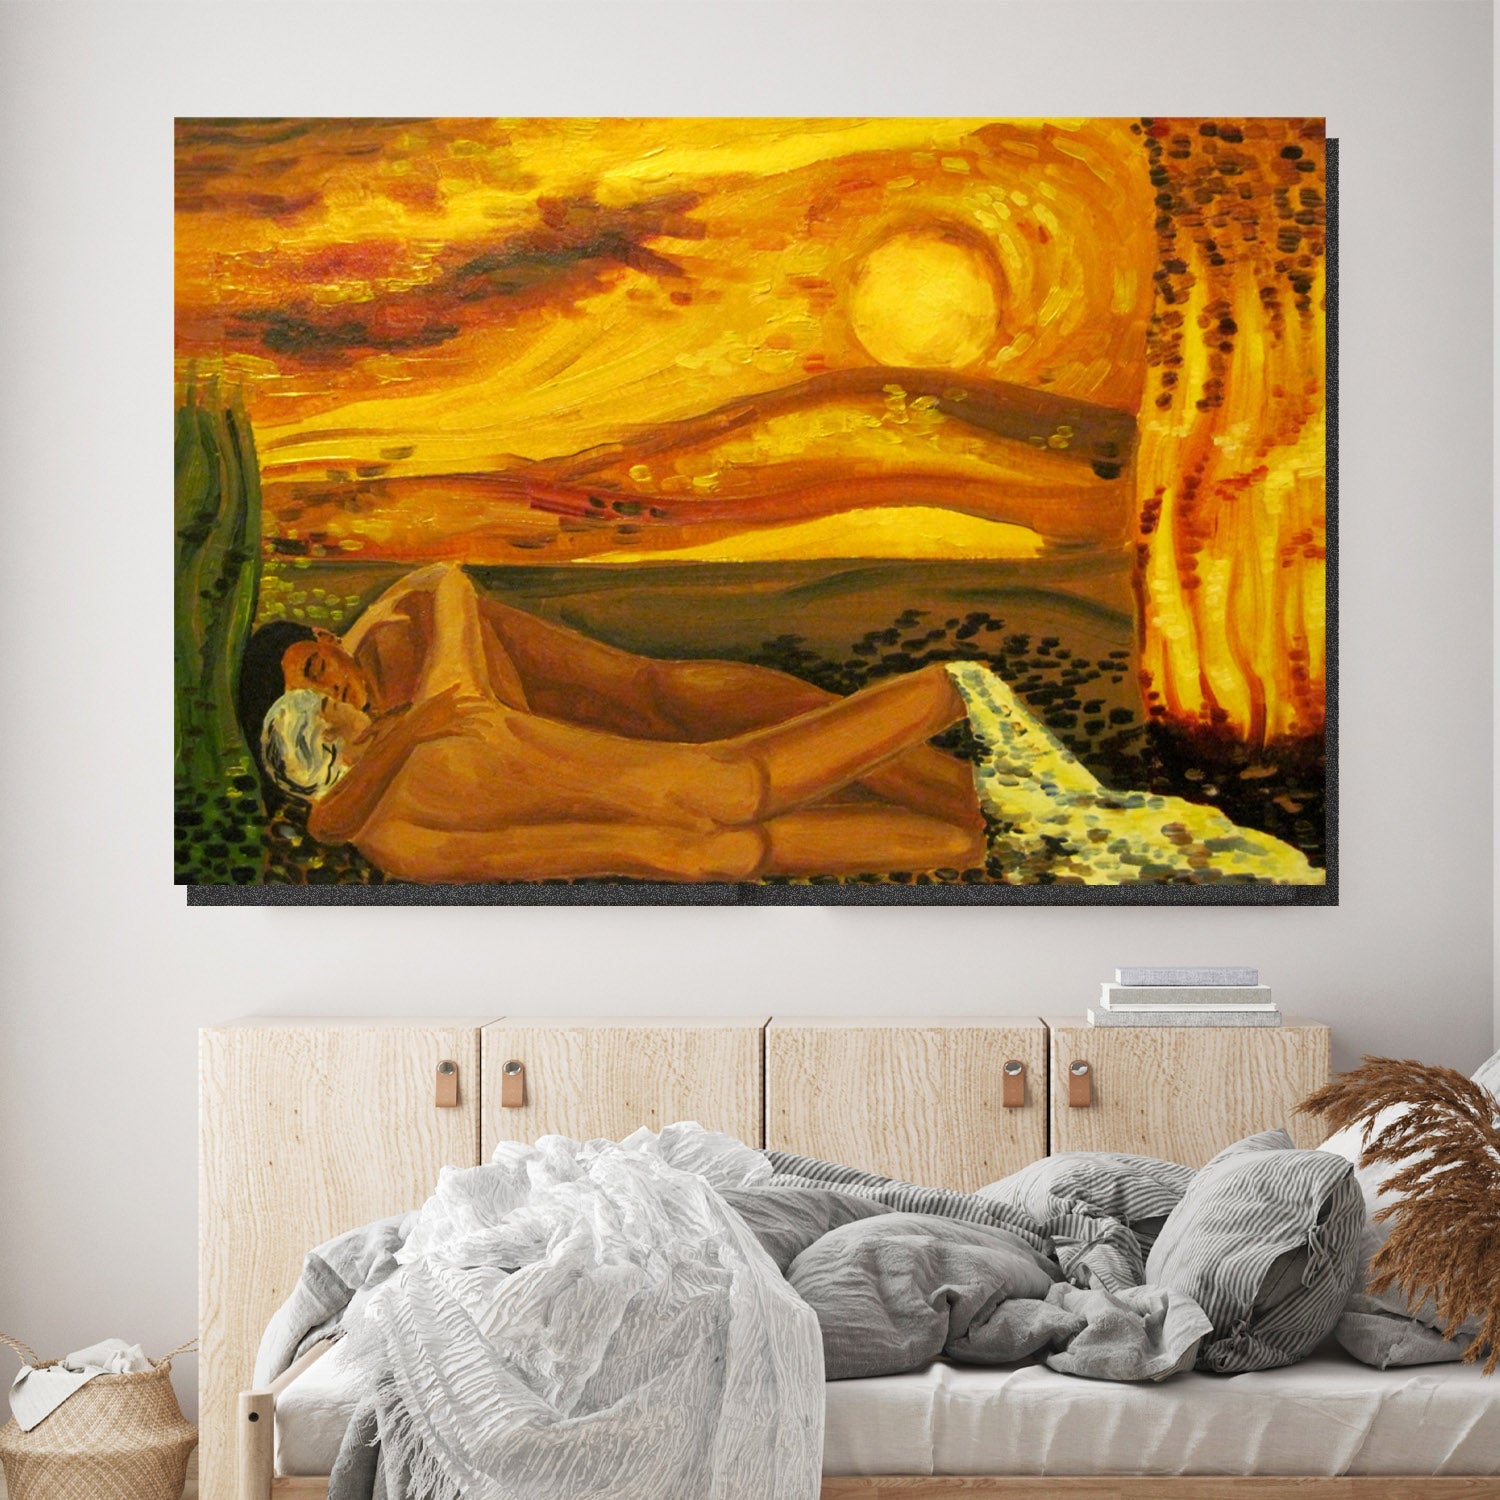 https://cdn.shopify.com/s/files/1/0387/9986/8044/products/CoupleatSunsetCanvasArtprintStretched-2.jpg